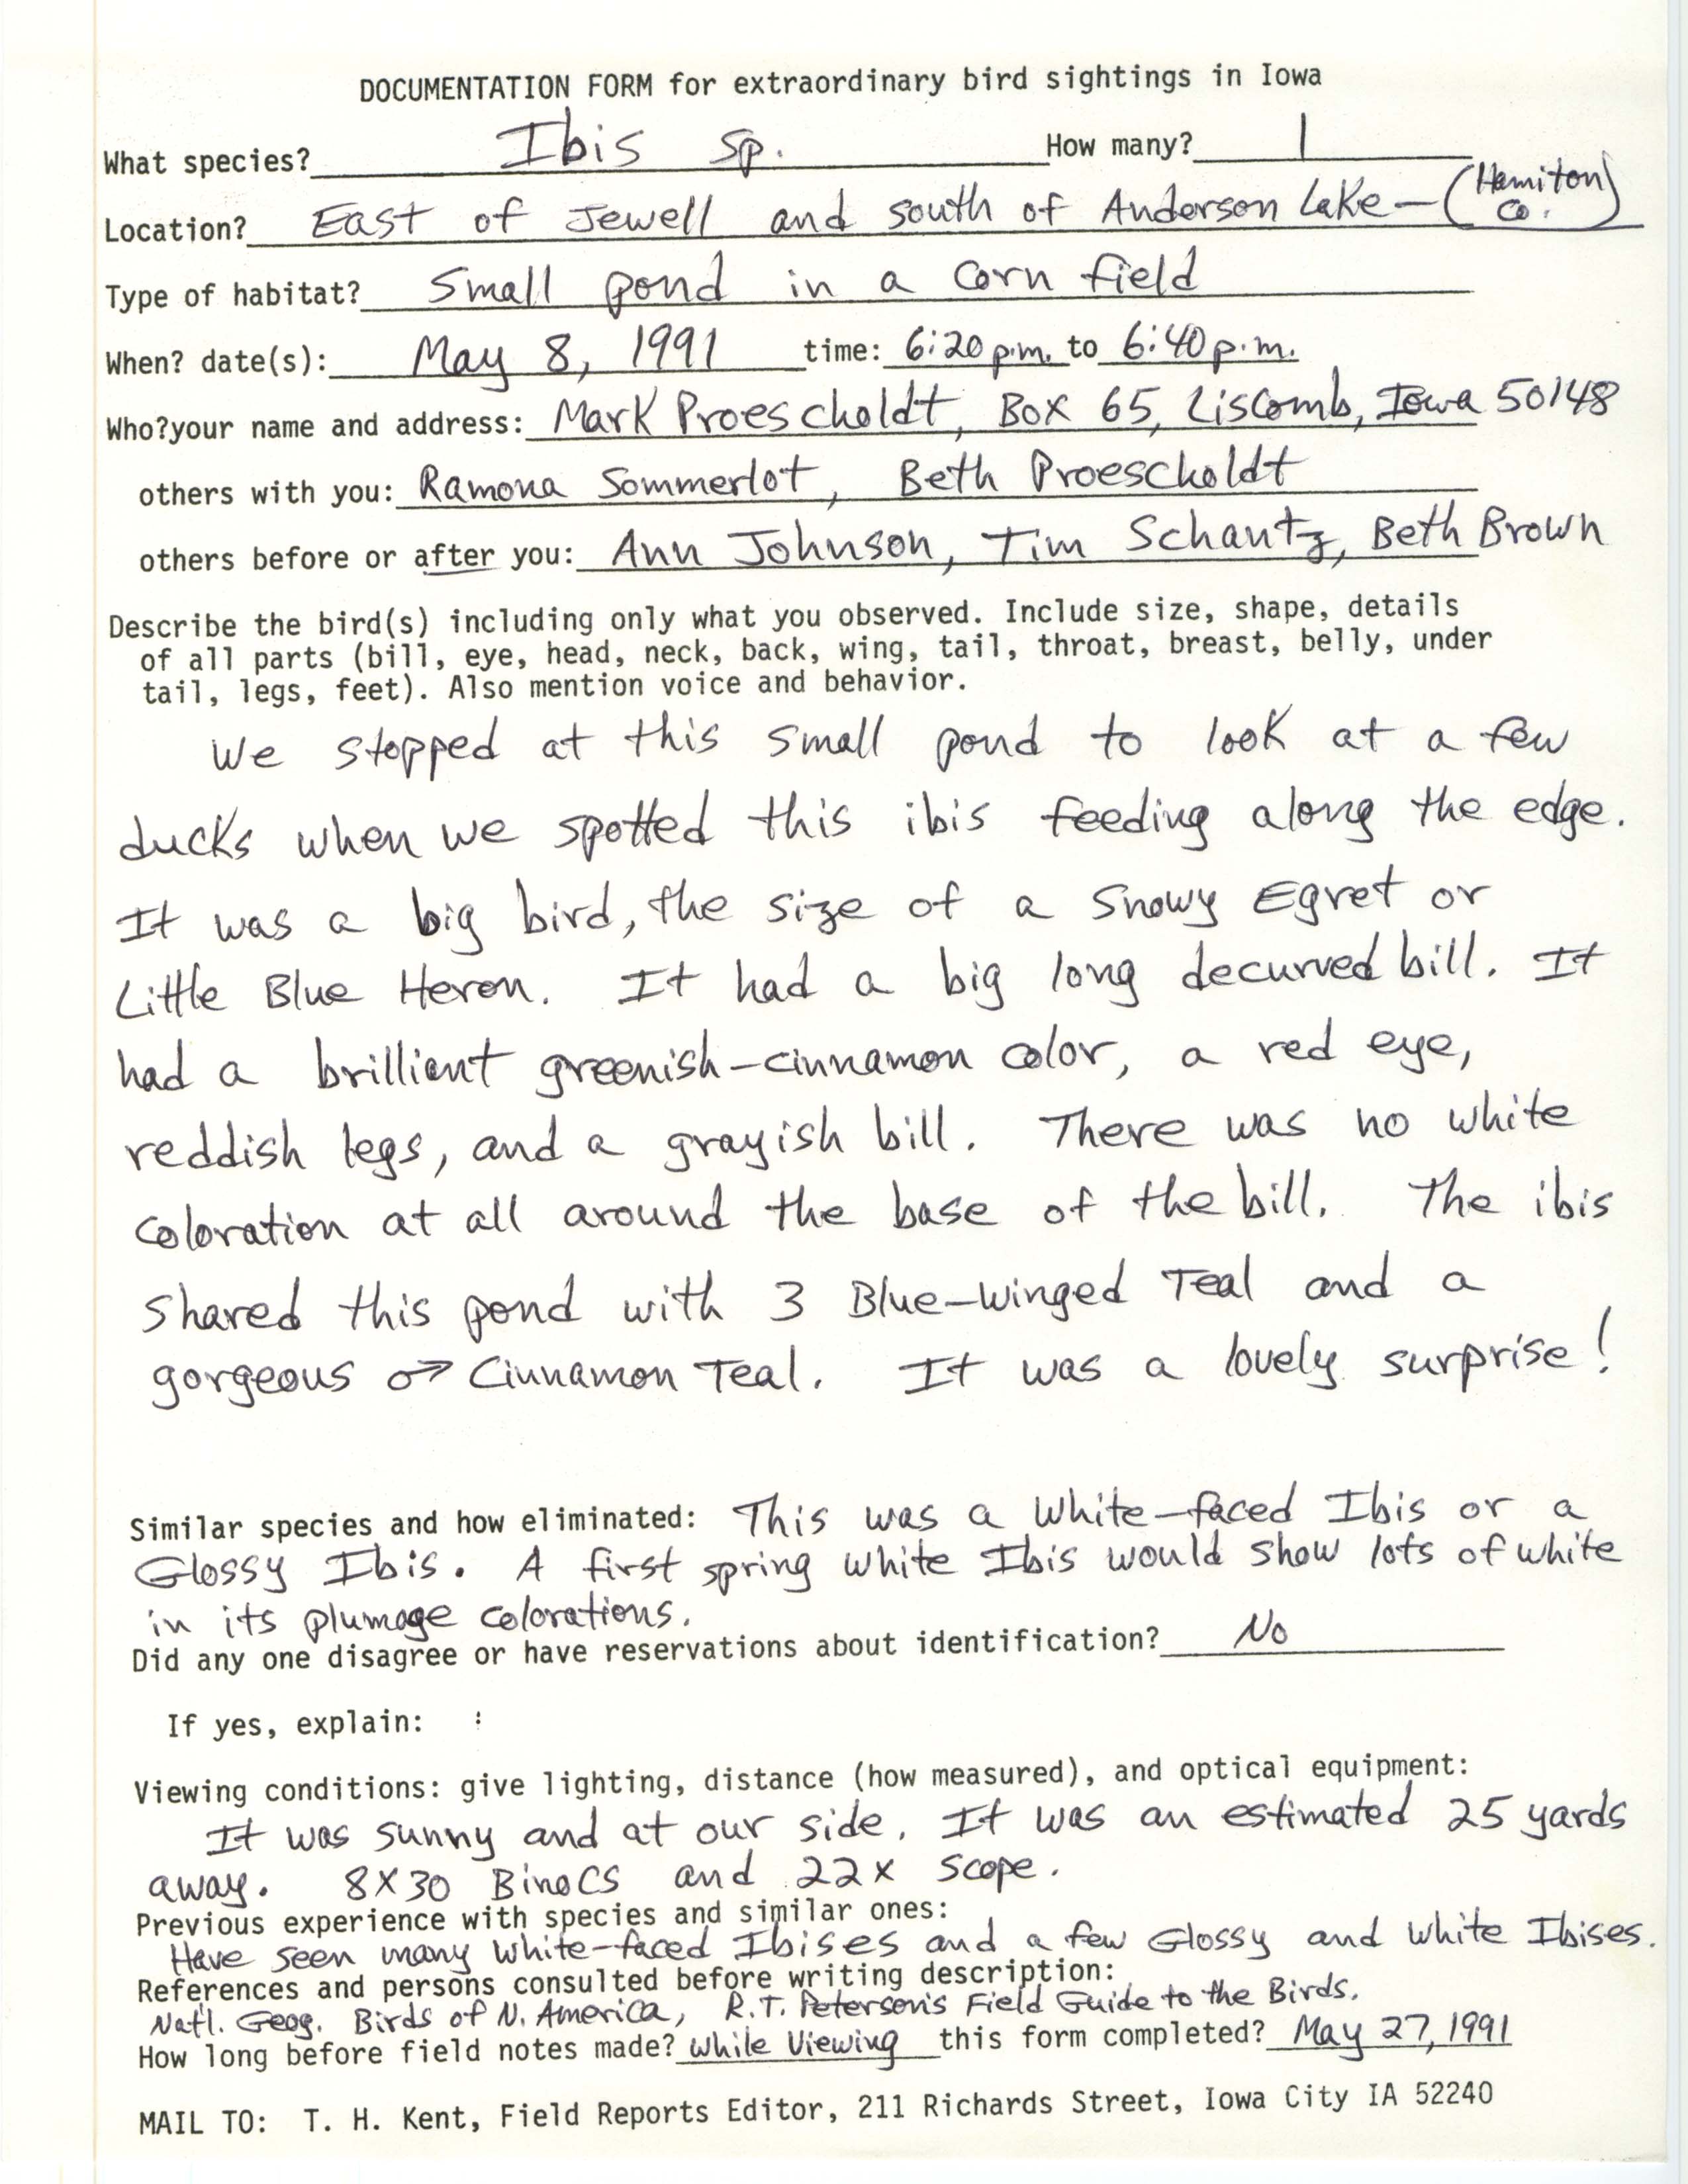 Rare bird documentation form for Ibis species at east of Jewell and south of Anderson Lake, 1991